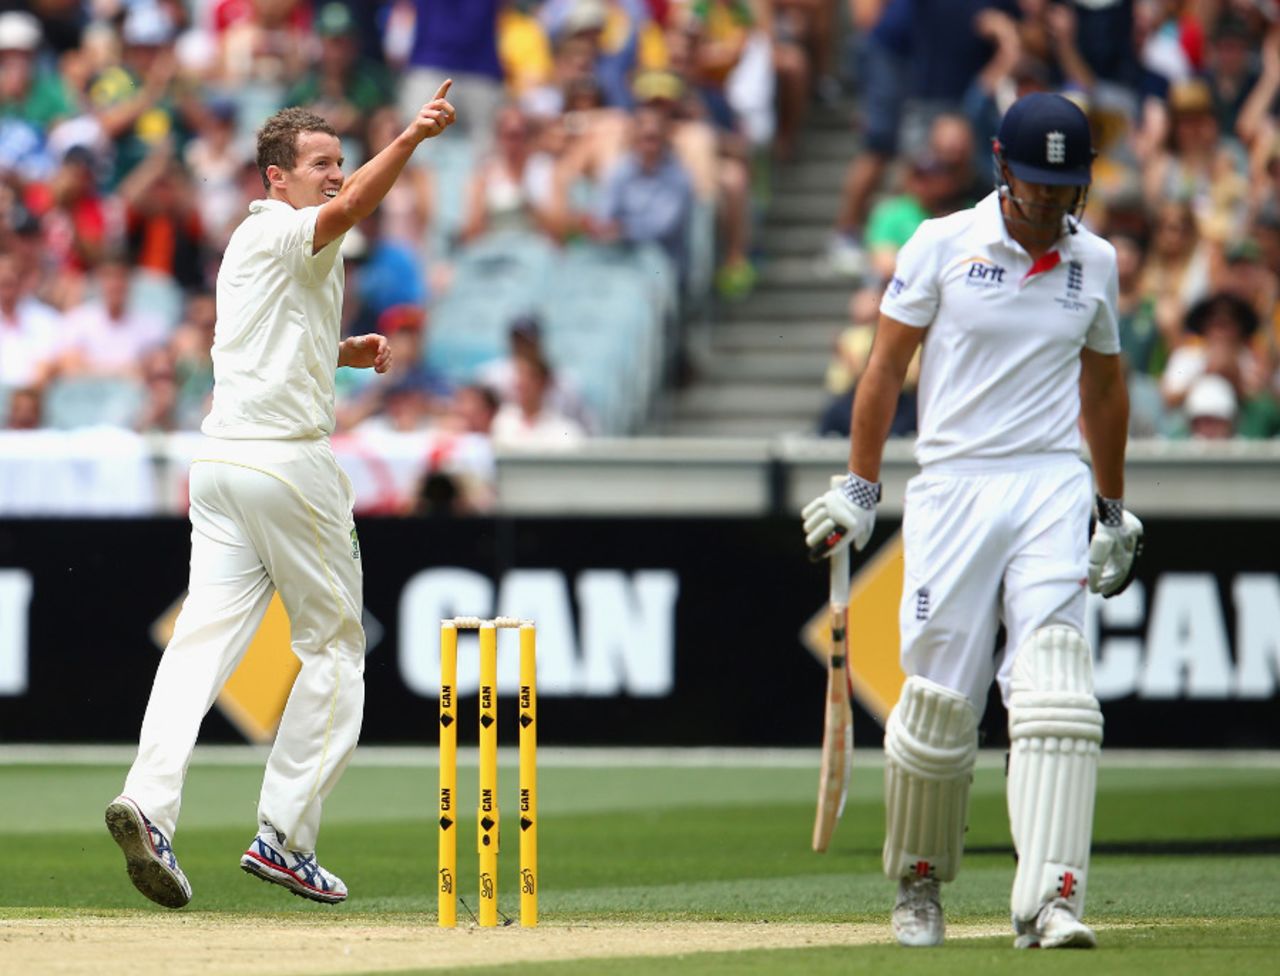 Peter Siddle had Alastair Cook caught at slip, Australia v England, 4th Test, Melbourne, 1st day, December 26, 2013